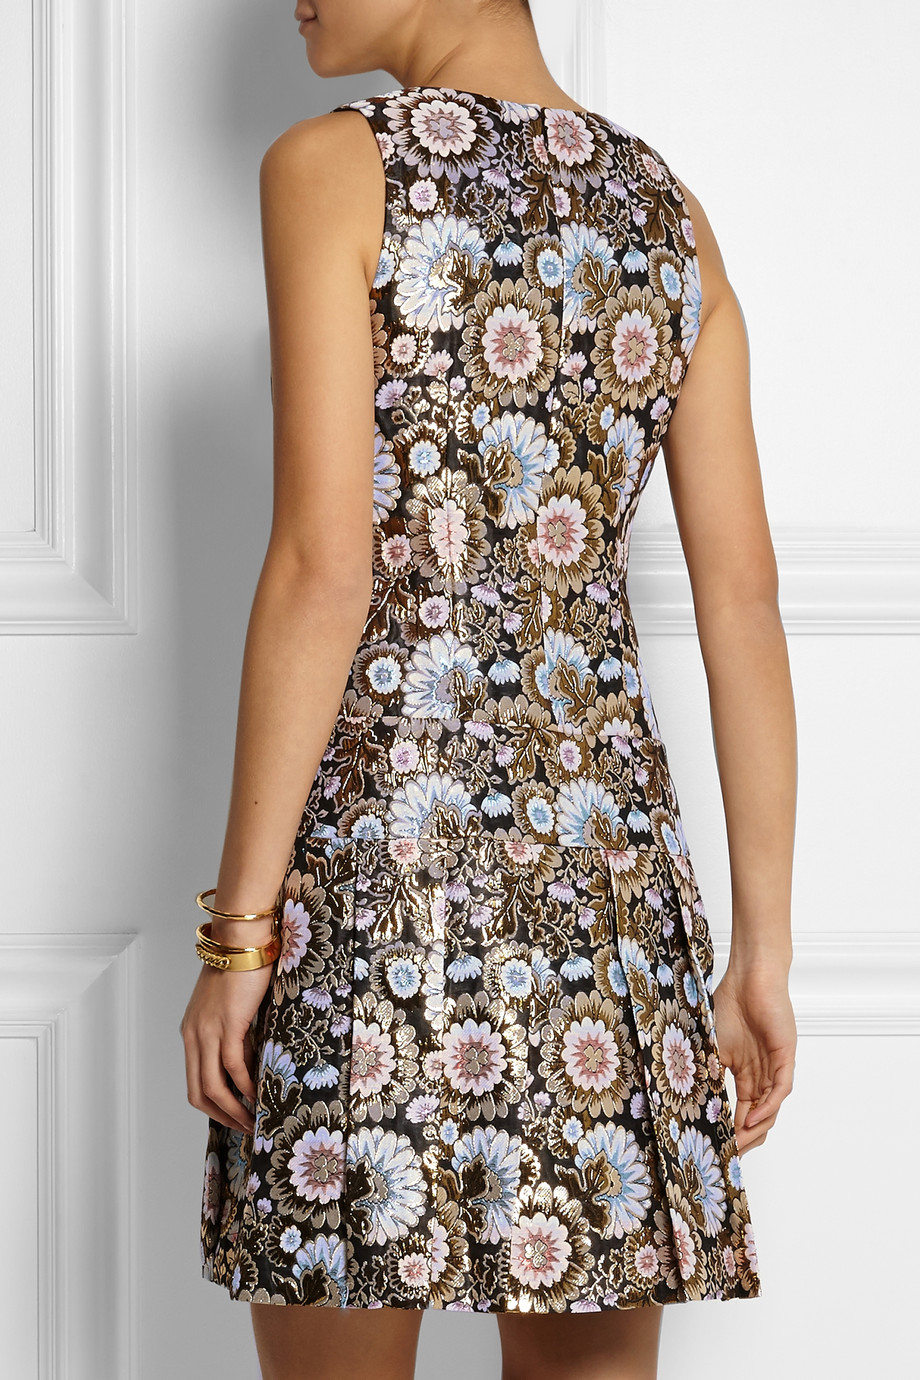 J.Crew Collection Metallic Floral-Jacquard Dress in Black - Lyst